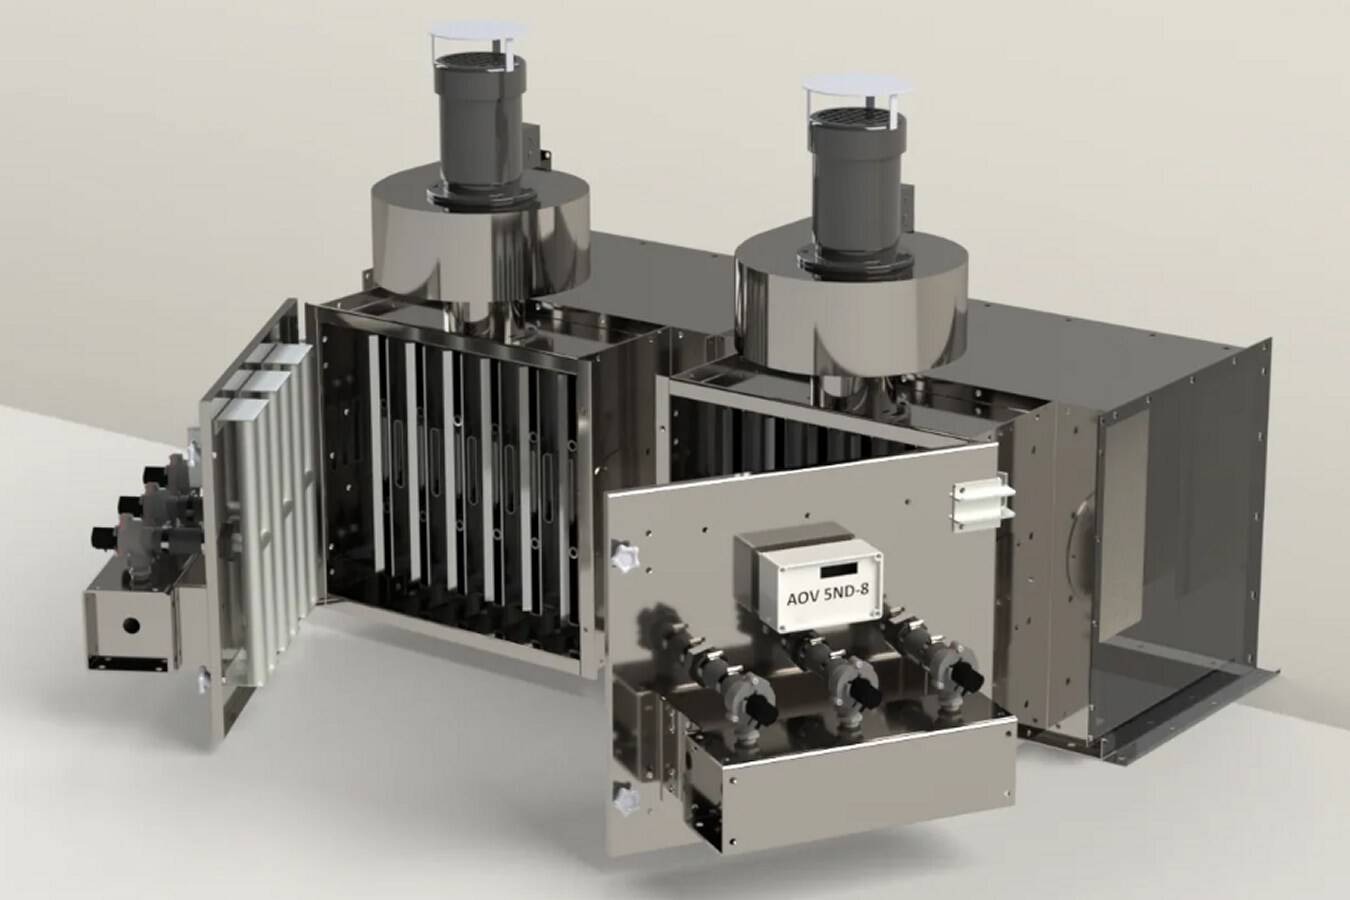 TBK spillage control develops DusTek Spot Filter Specifically designed for a conveyor transfer point, linking standardized extractor units, for maximum flexibility of filtration surface and exhaust flow